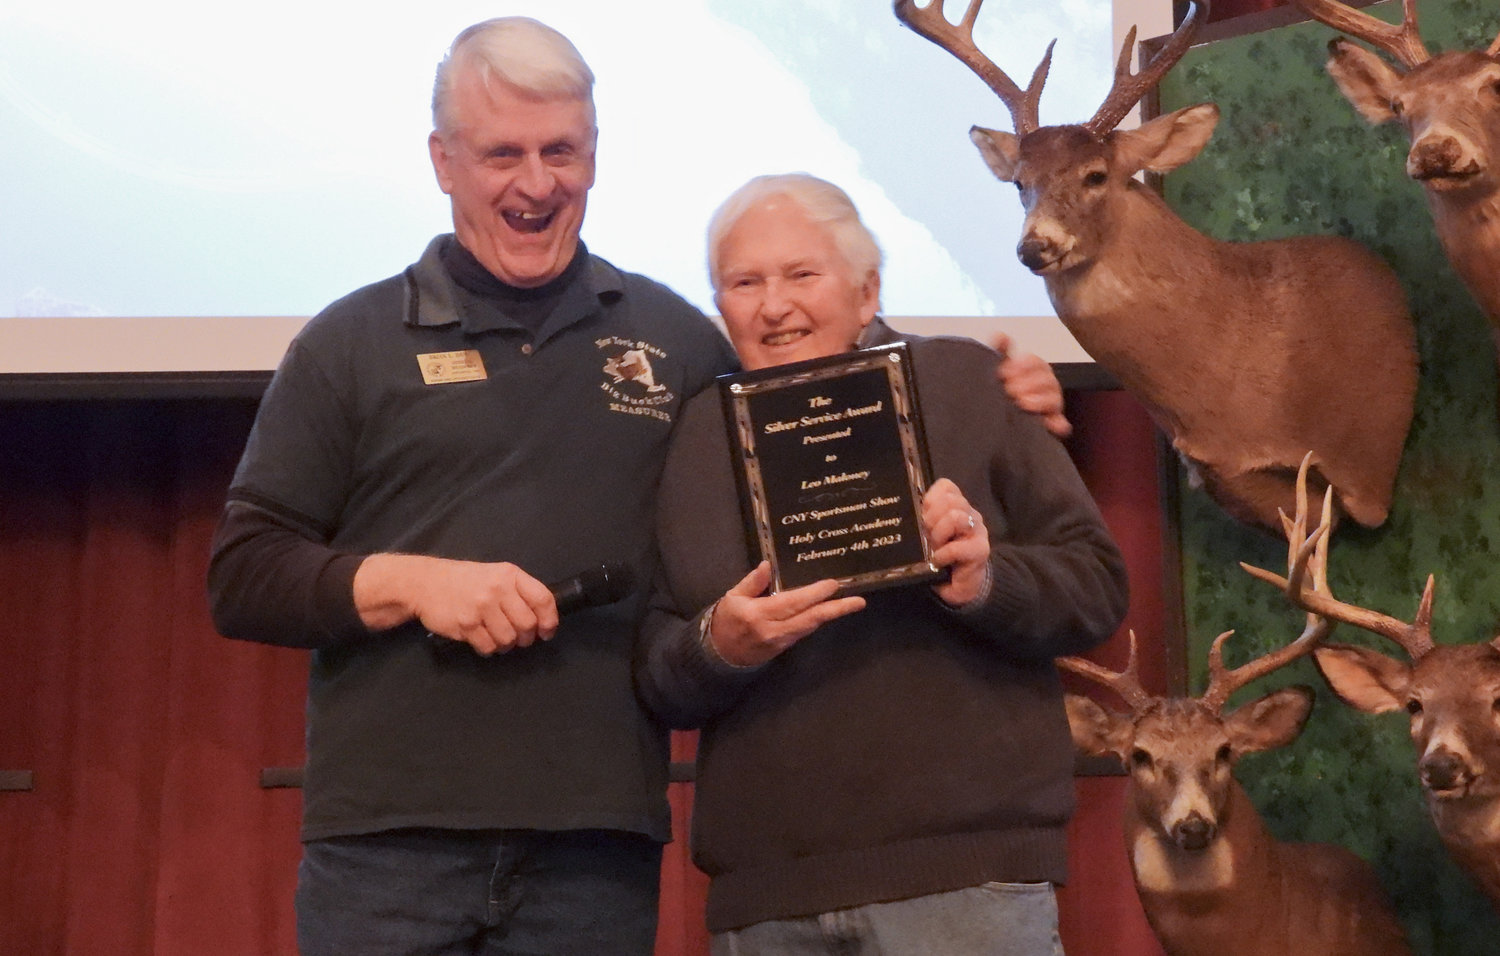 Leo Maloney is honored with the Silver Service at the CNY Sportsman Show on Saturday, Feb. 4 for his dedication and service to the CNY Sportsman Show since its inception.